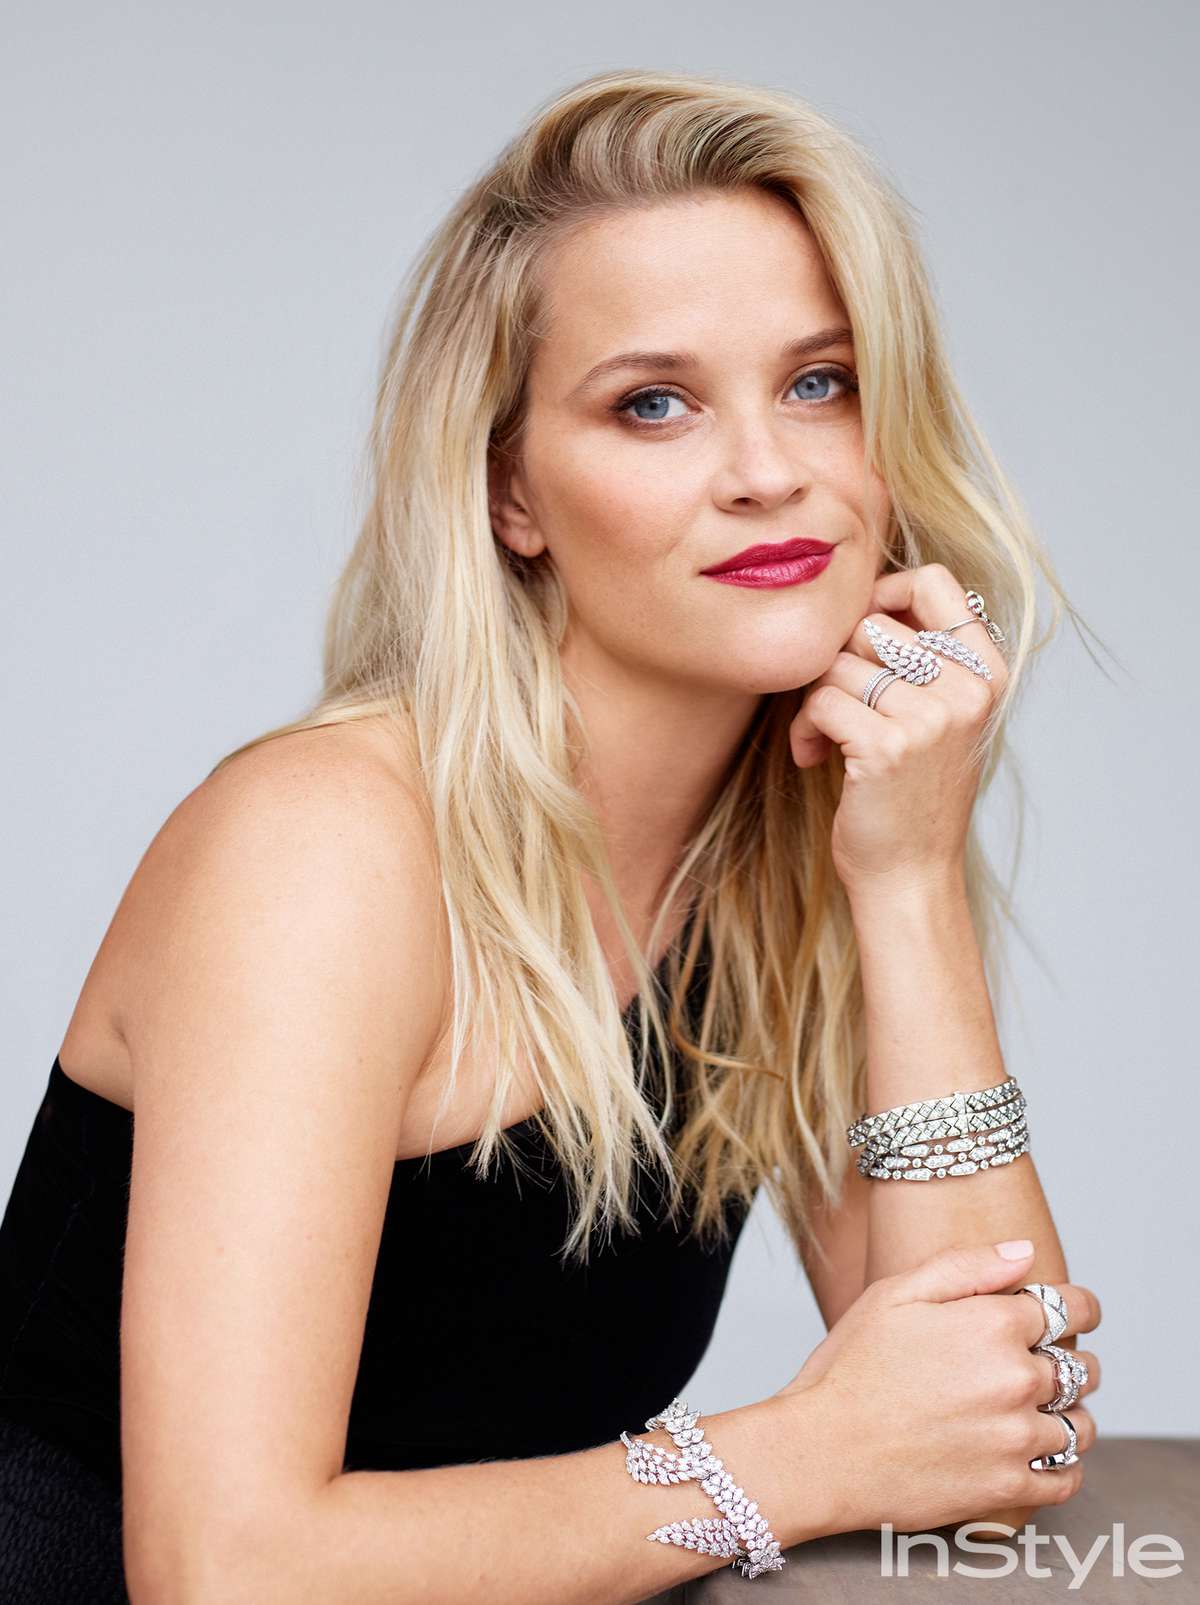 Reese Witherspoon - InStyle December 2016 - The List LEAD